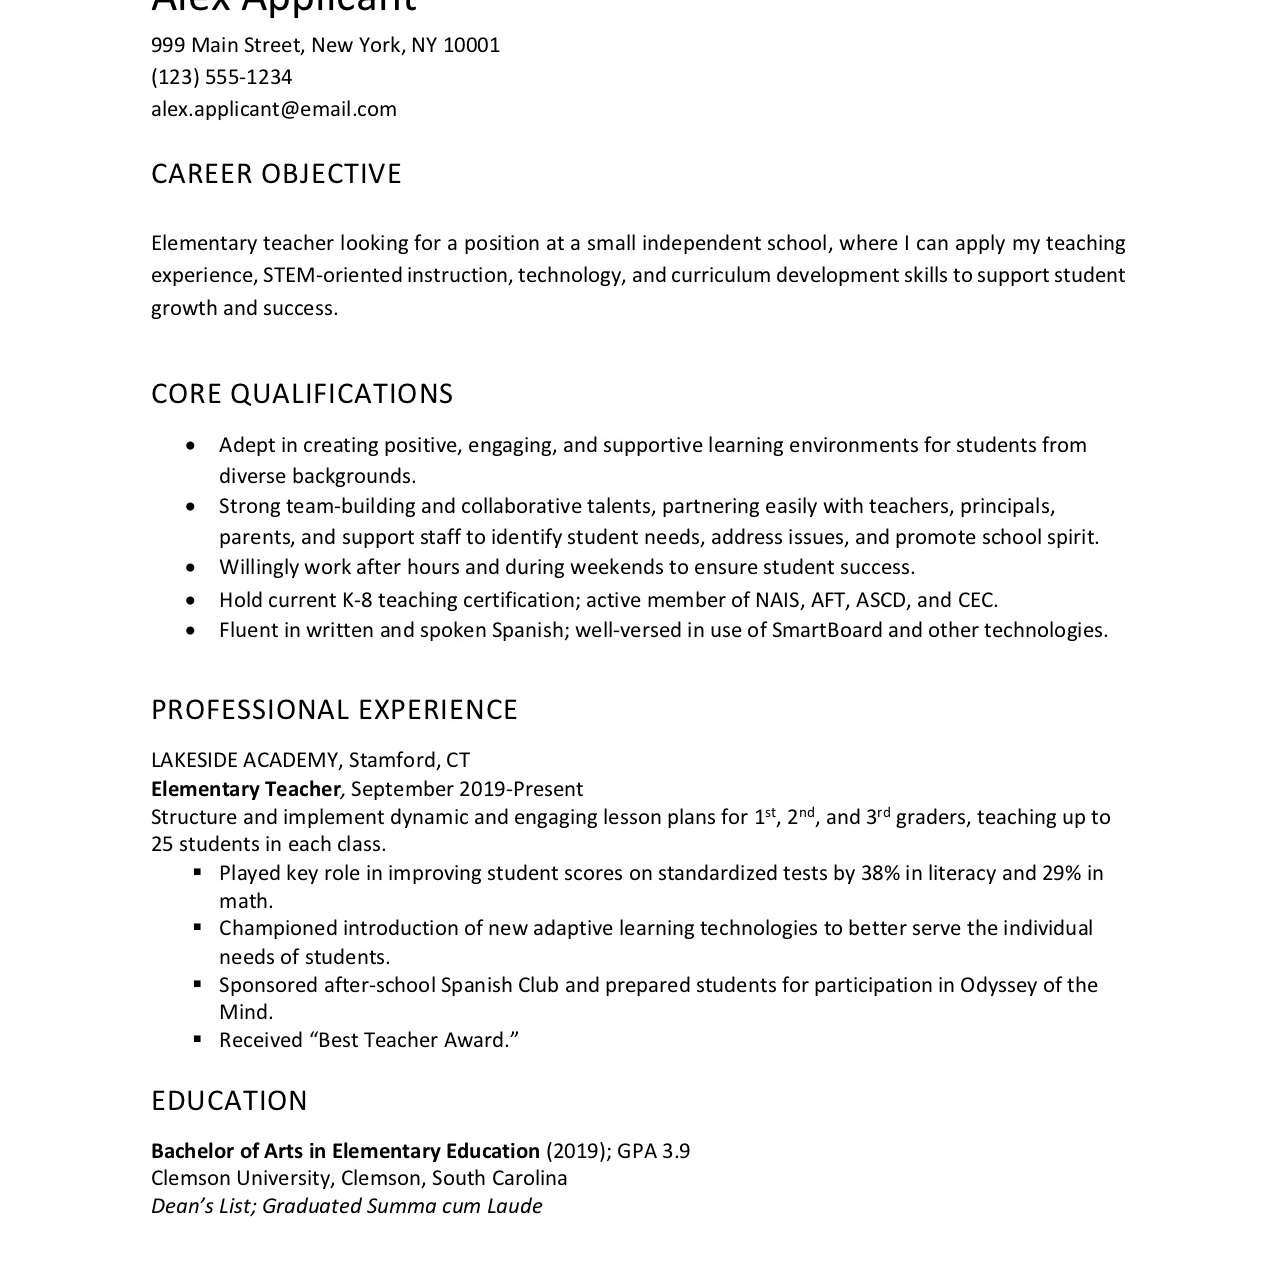 Resume Career Objective Samples for Freshers Resume Objective Examples and Writing Tips